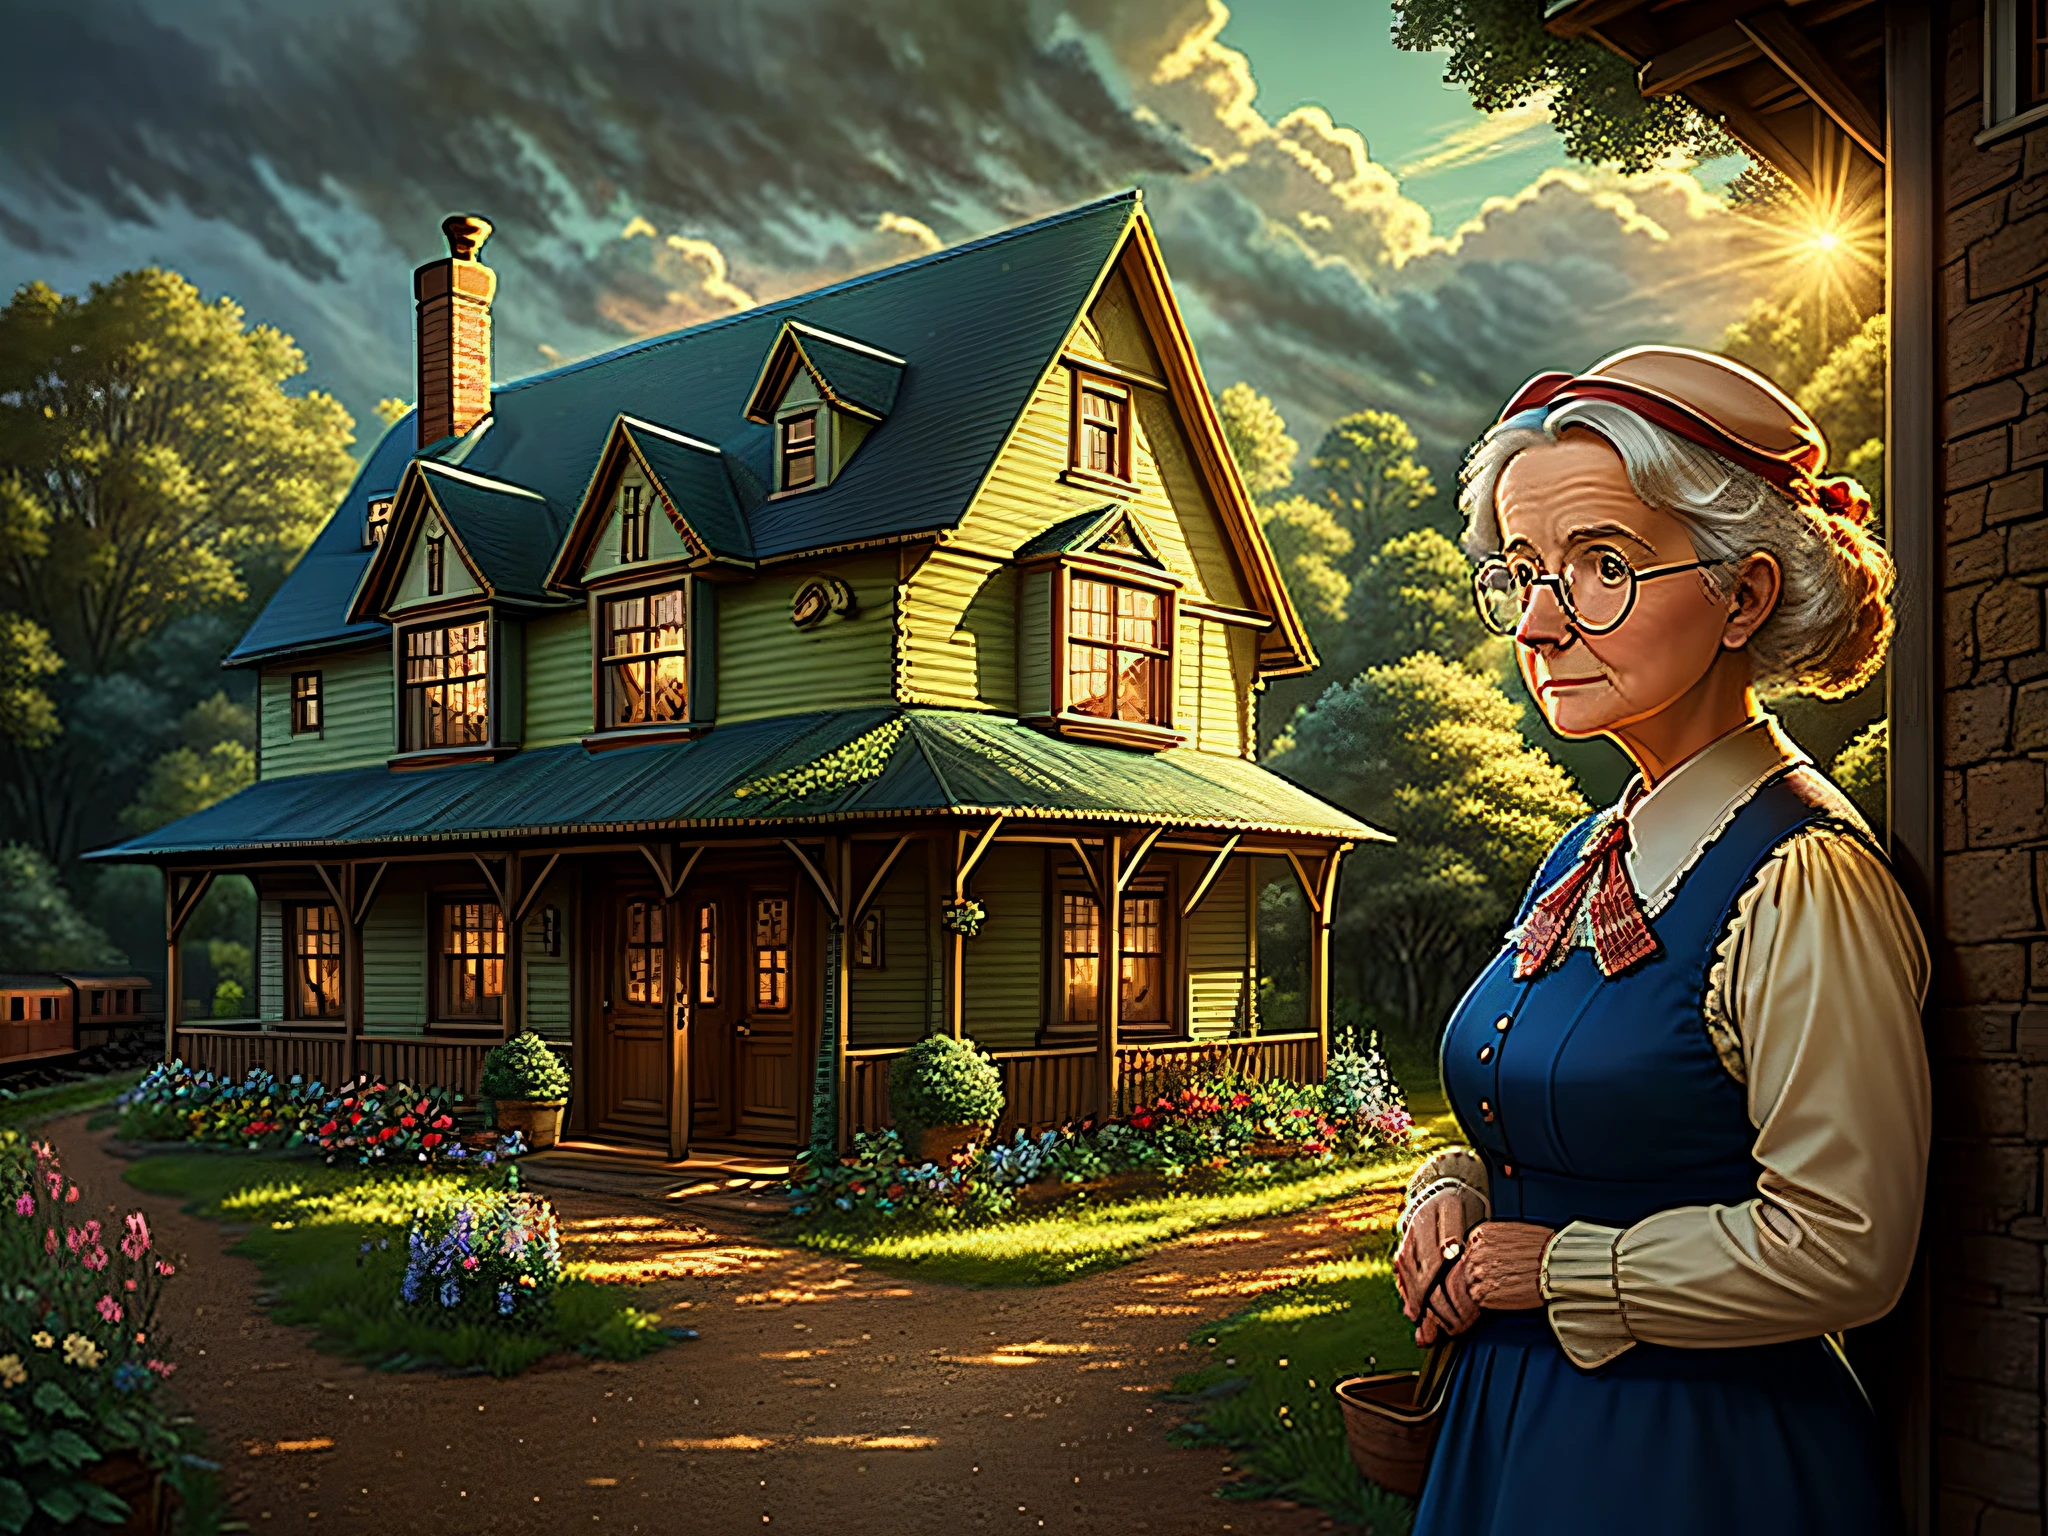 High quality, High quality, nostalgic scene detailed country house. Grandmother with glasses alone, near the house watching the train arrive, little lightnostalgic cottage detailed. Grandmother with glasses near the house watching the train arrive, low light